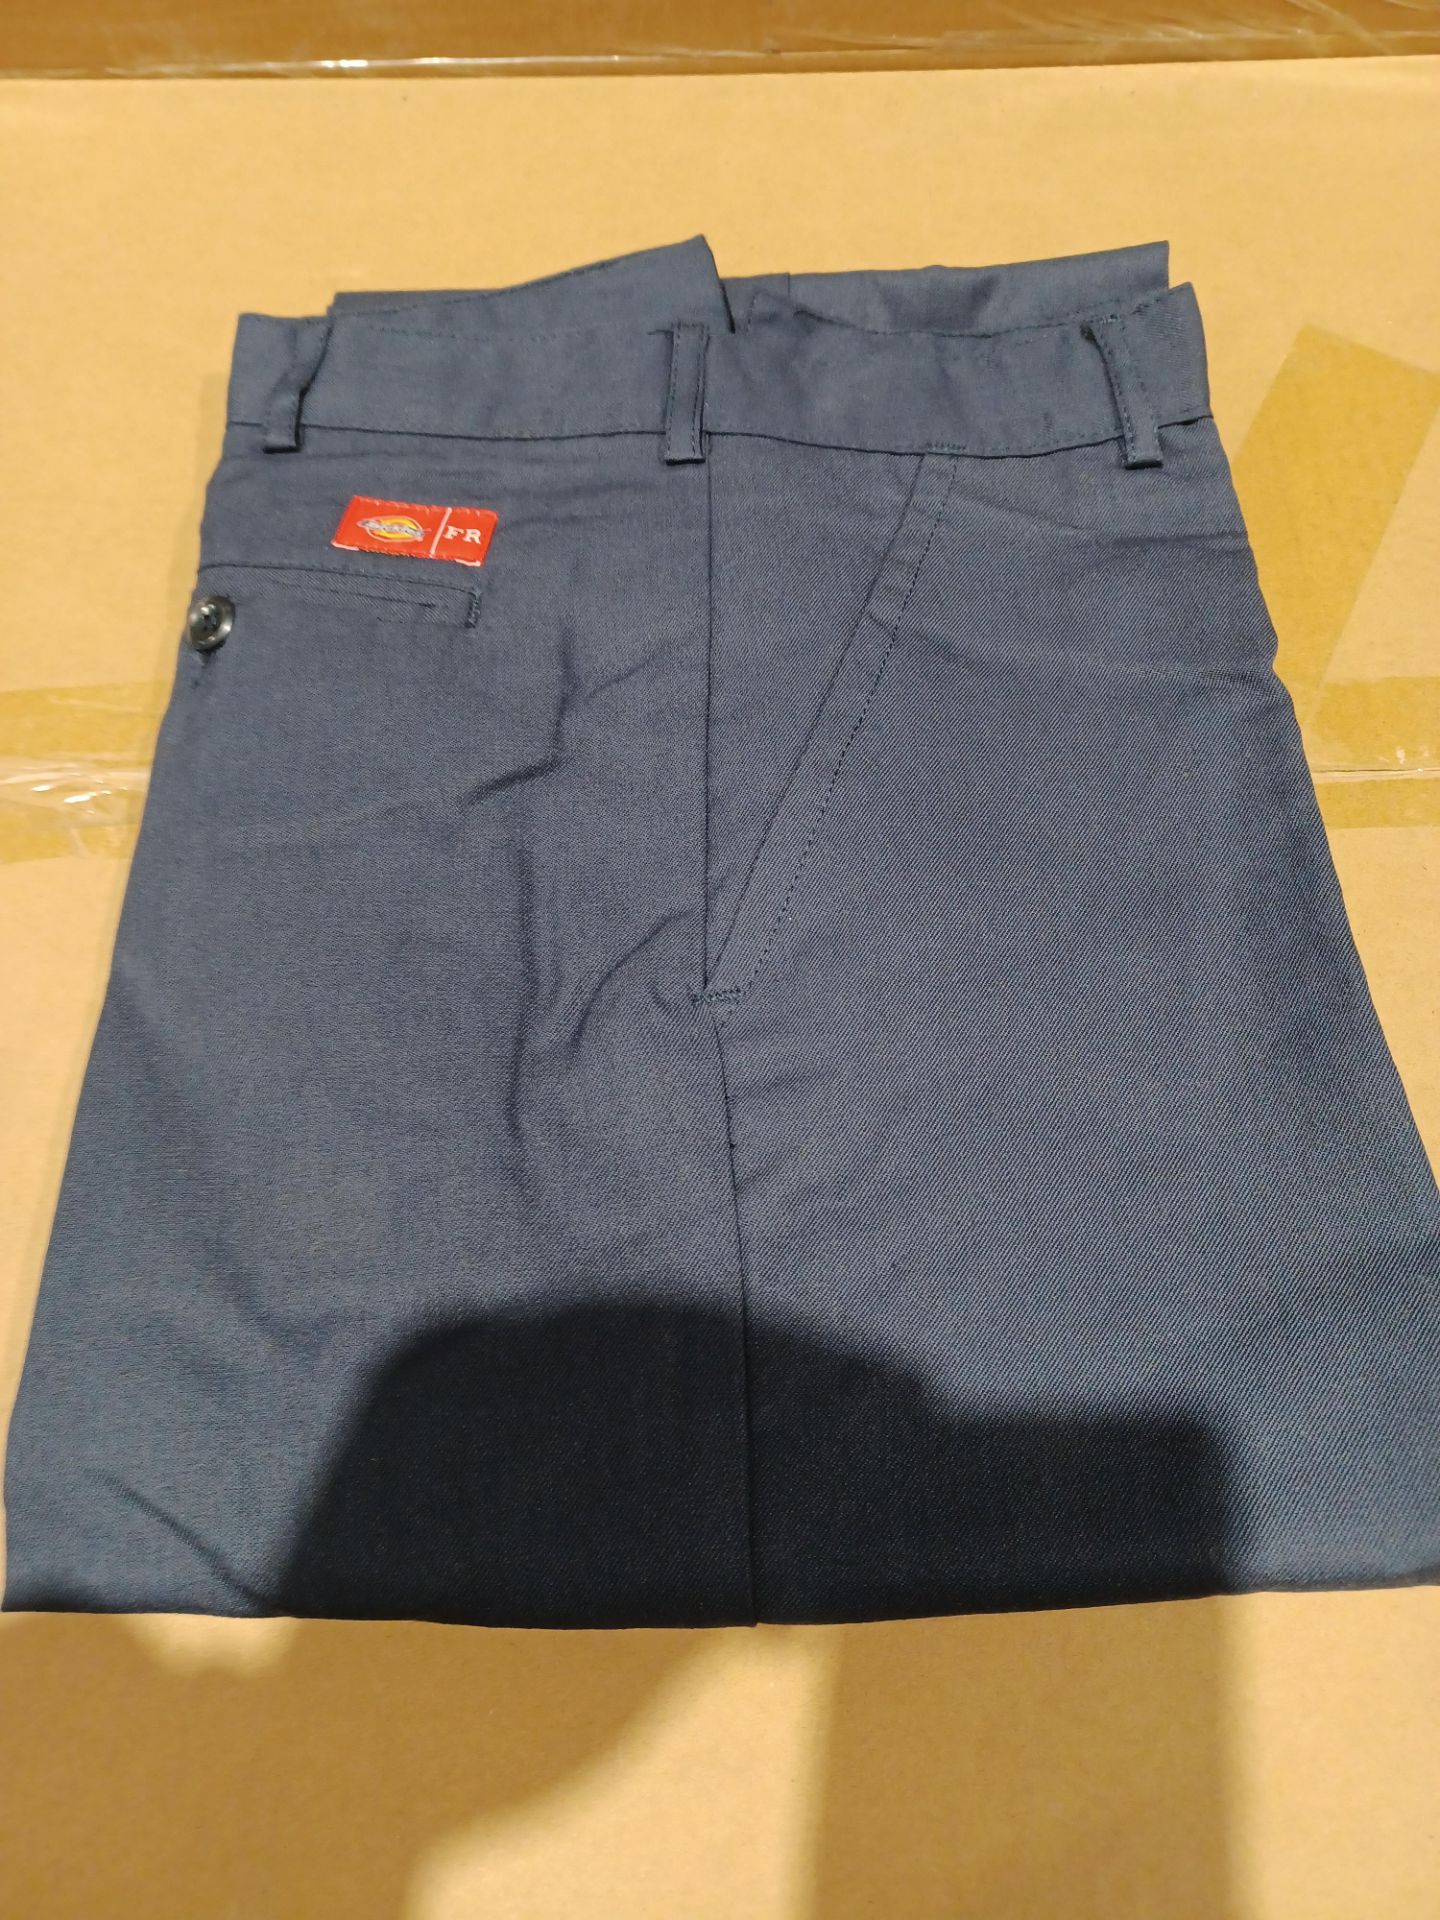 12 X BRAND NEW DICKIES NAVY FIRE RESISTANT WORK TROUSERS (SIZES MAY VARY) S1-21